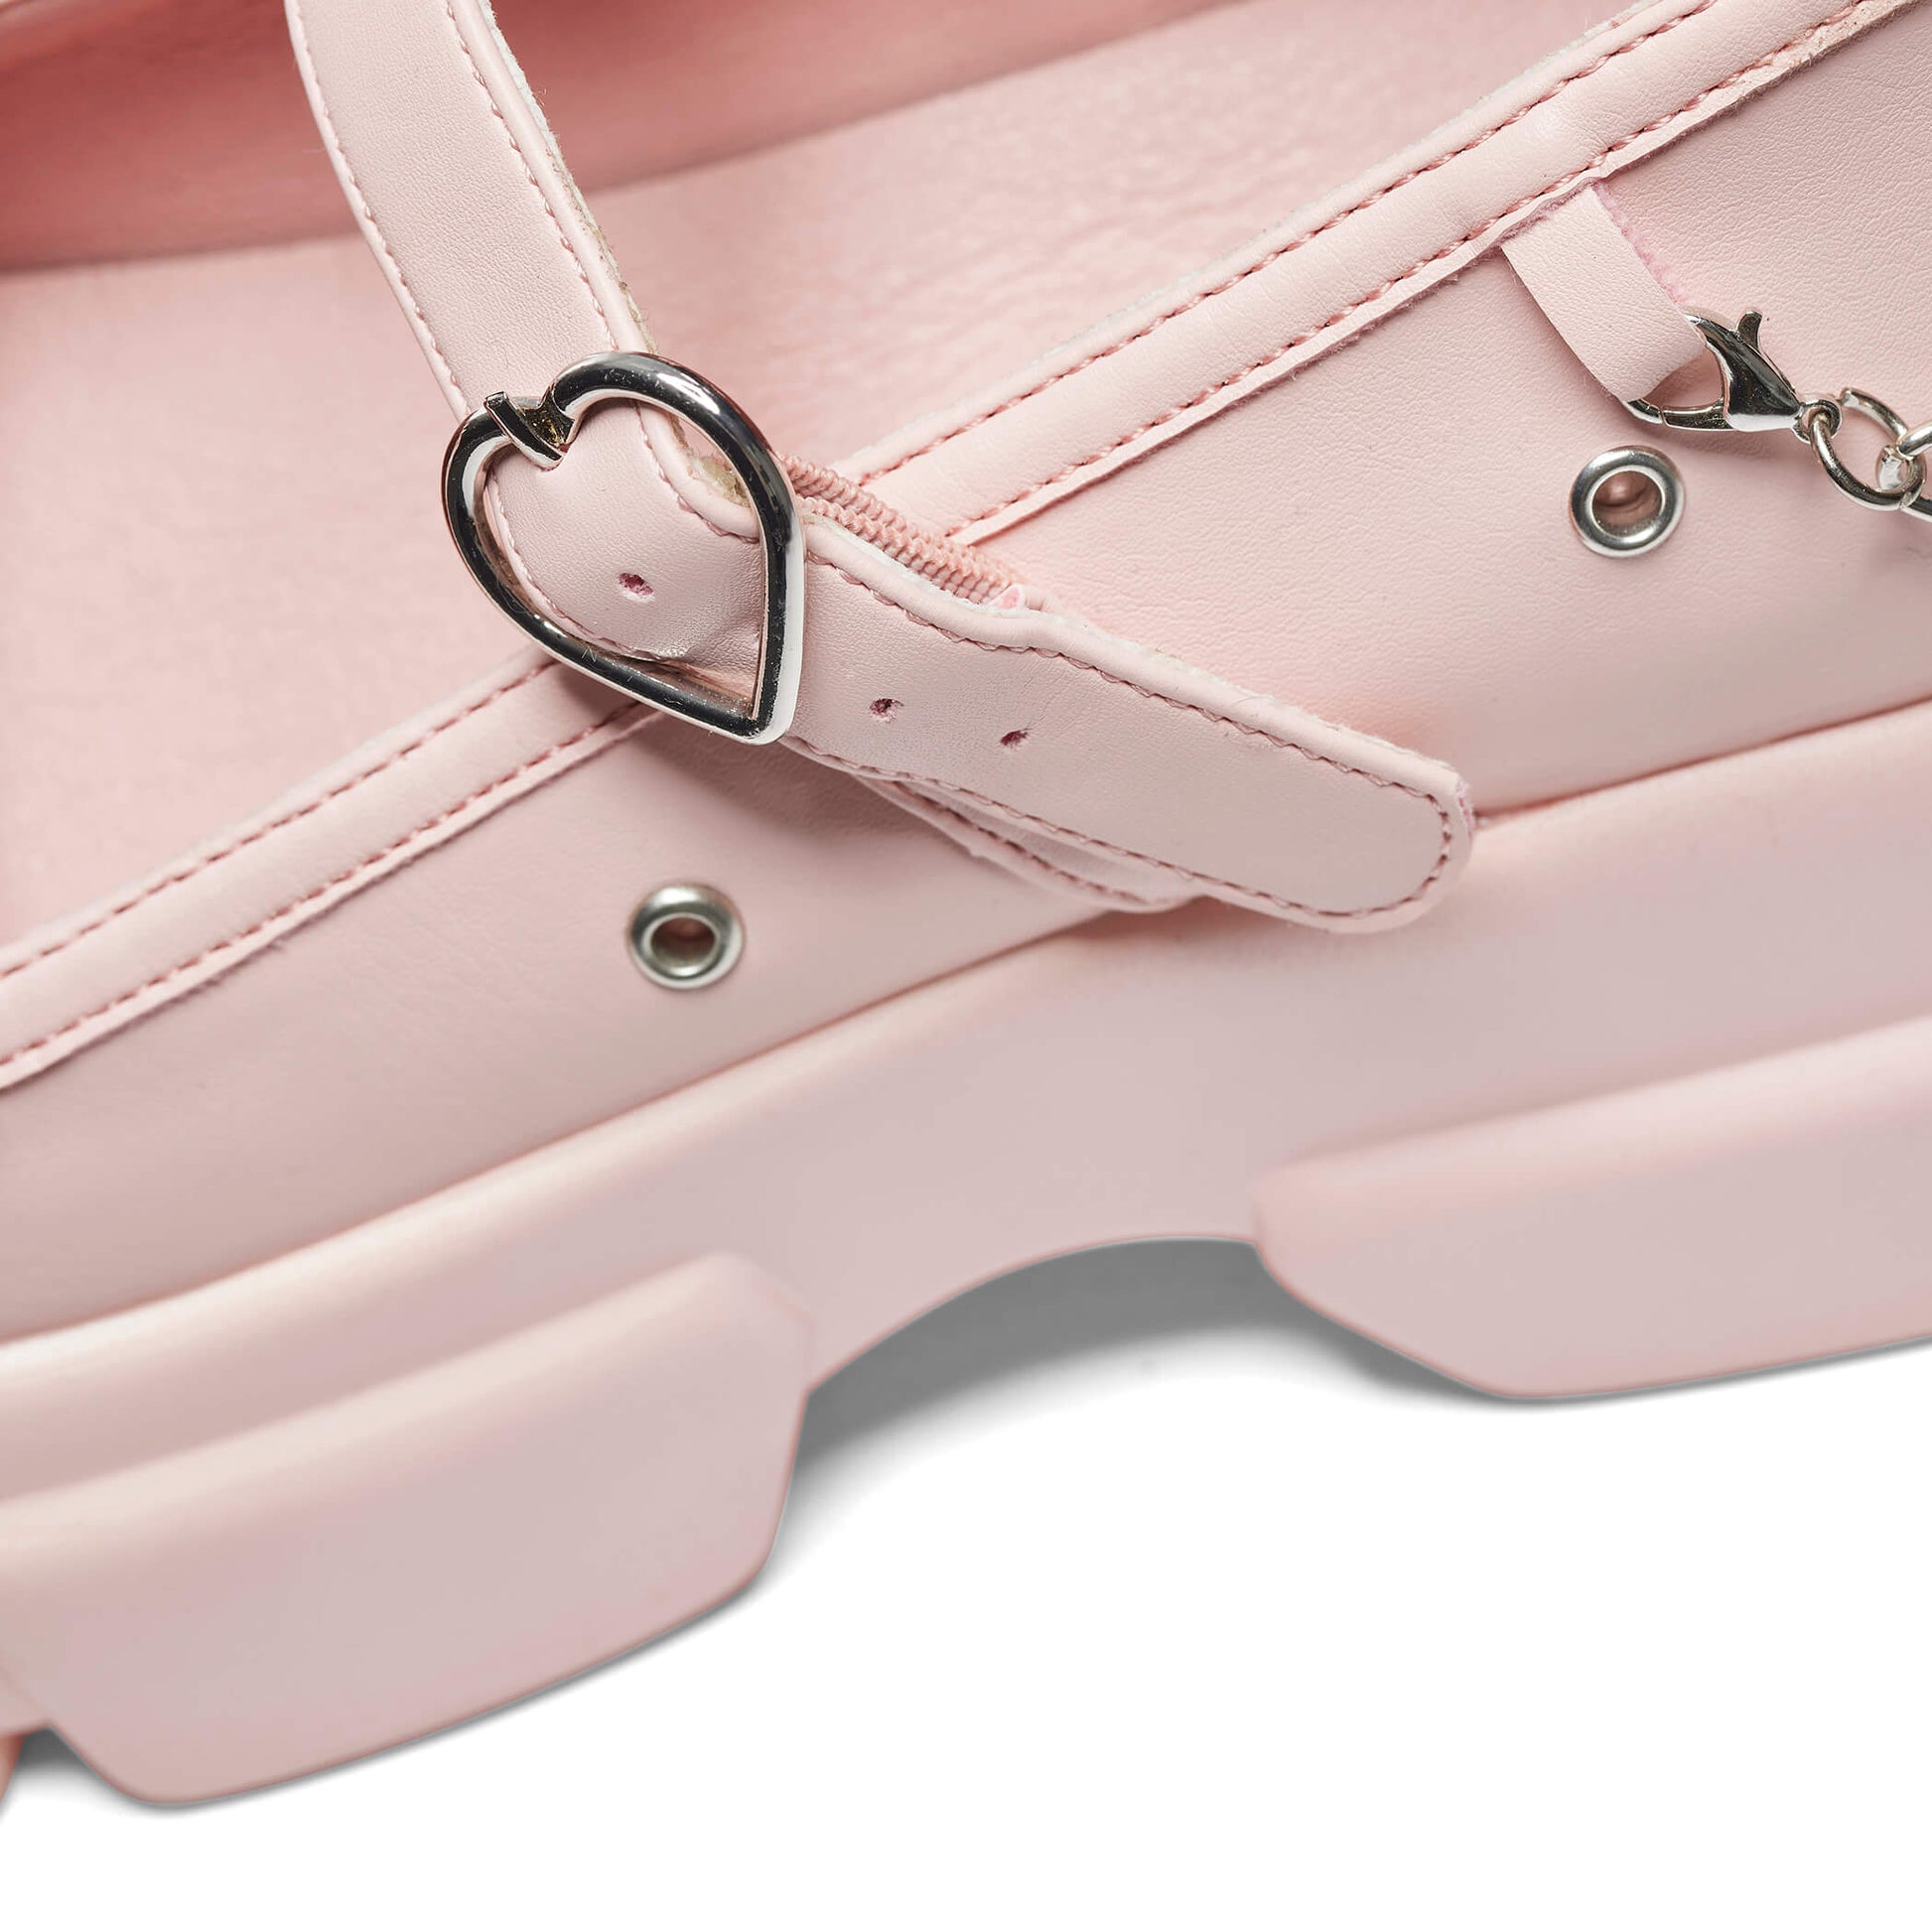 Cloud Mist Chunky Shoes - Baby Pink - Shoes - KOI Footwear - Pink - Buckle Detail